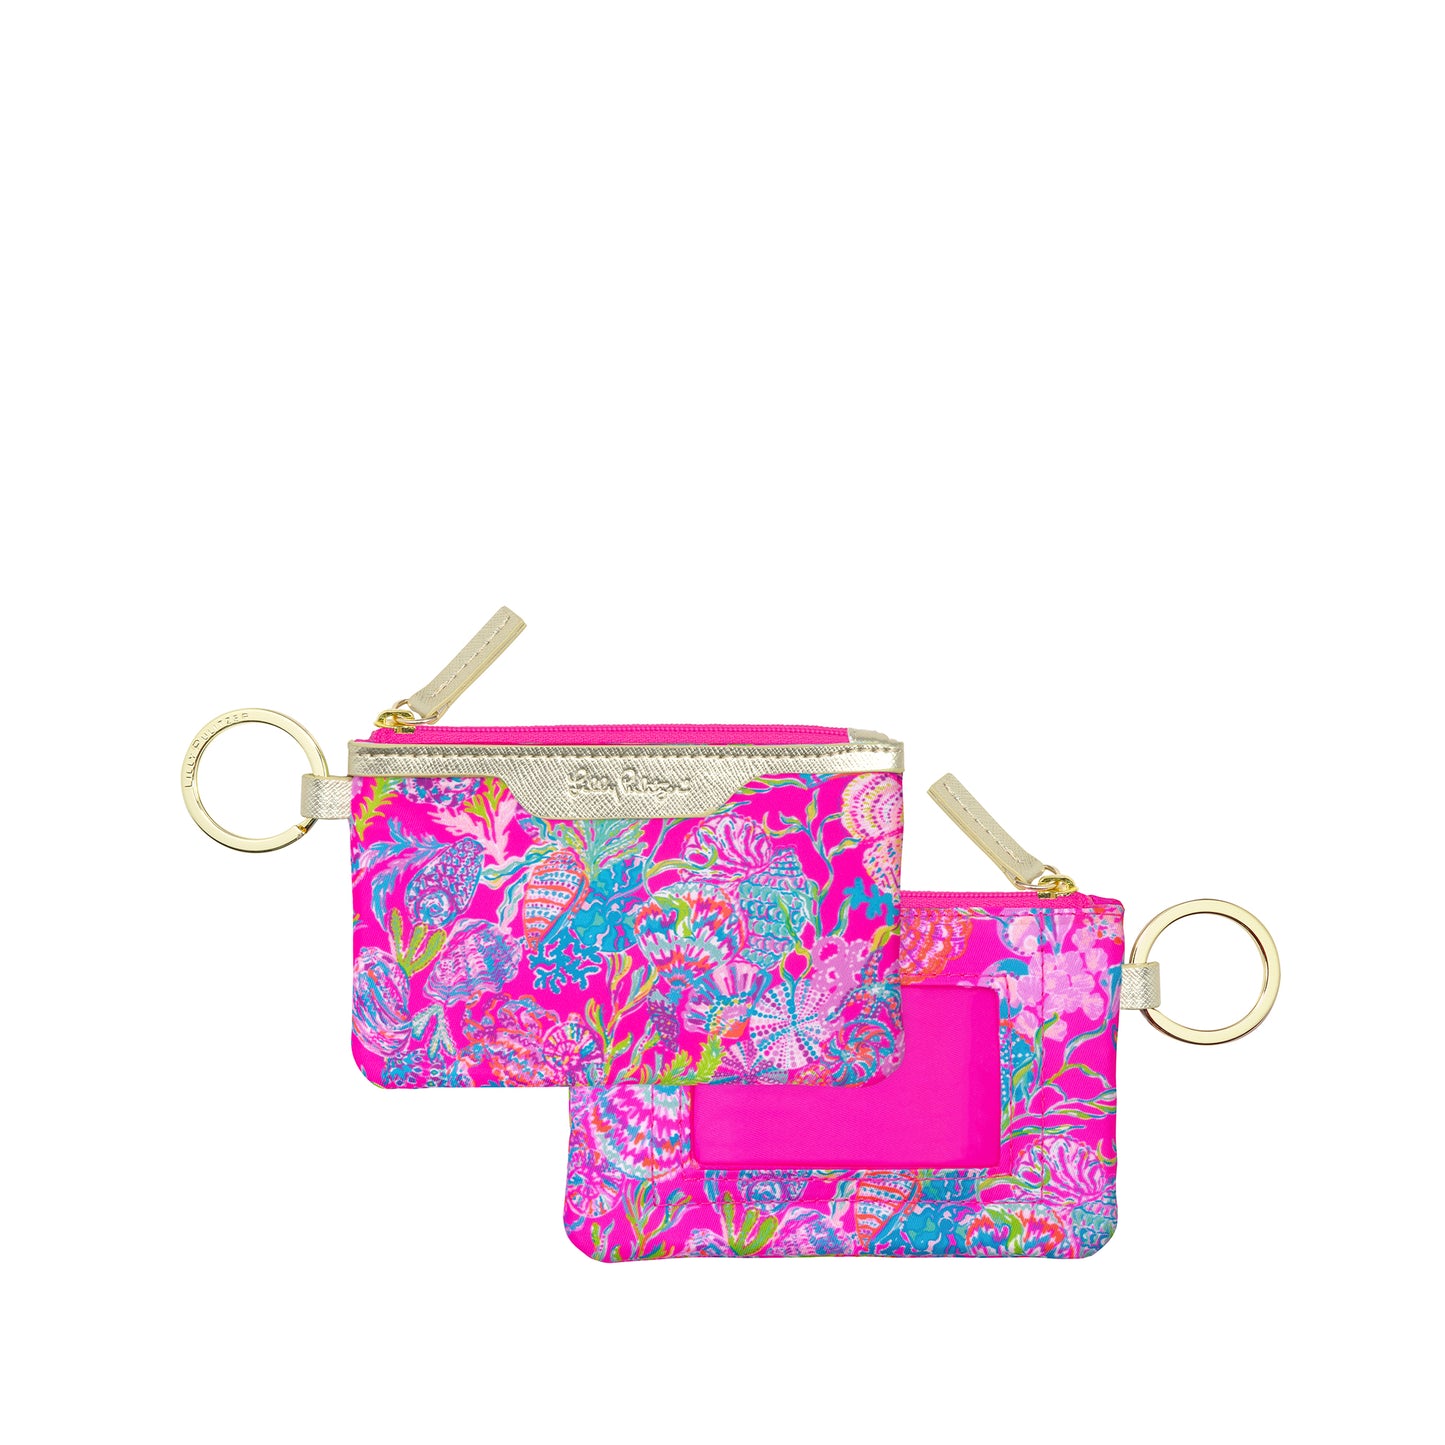 Lilly Pulitzer Pencil Pouch - Round, Shell Me Something Good